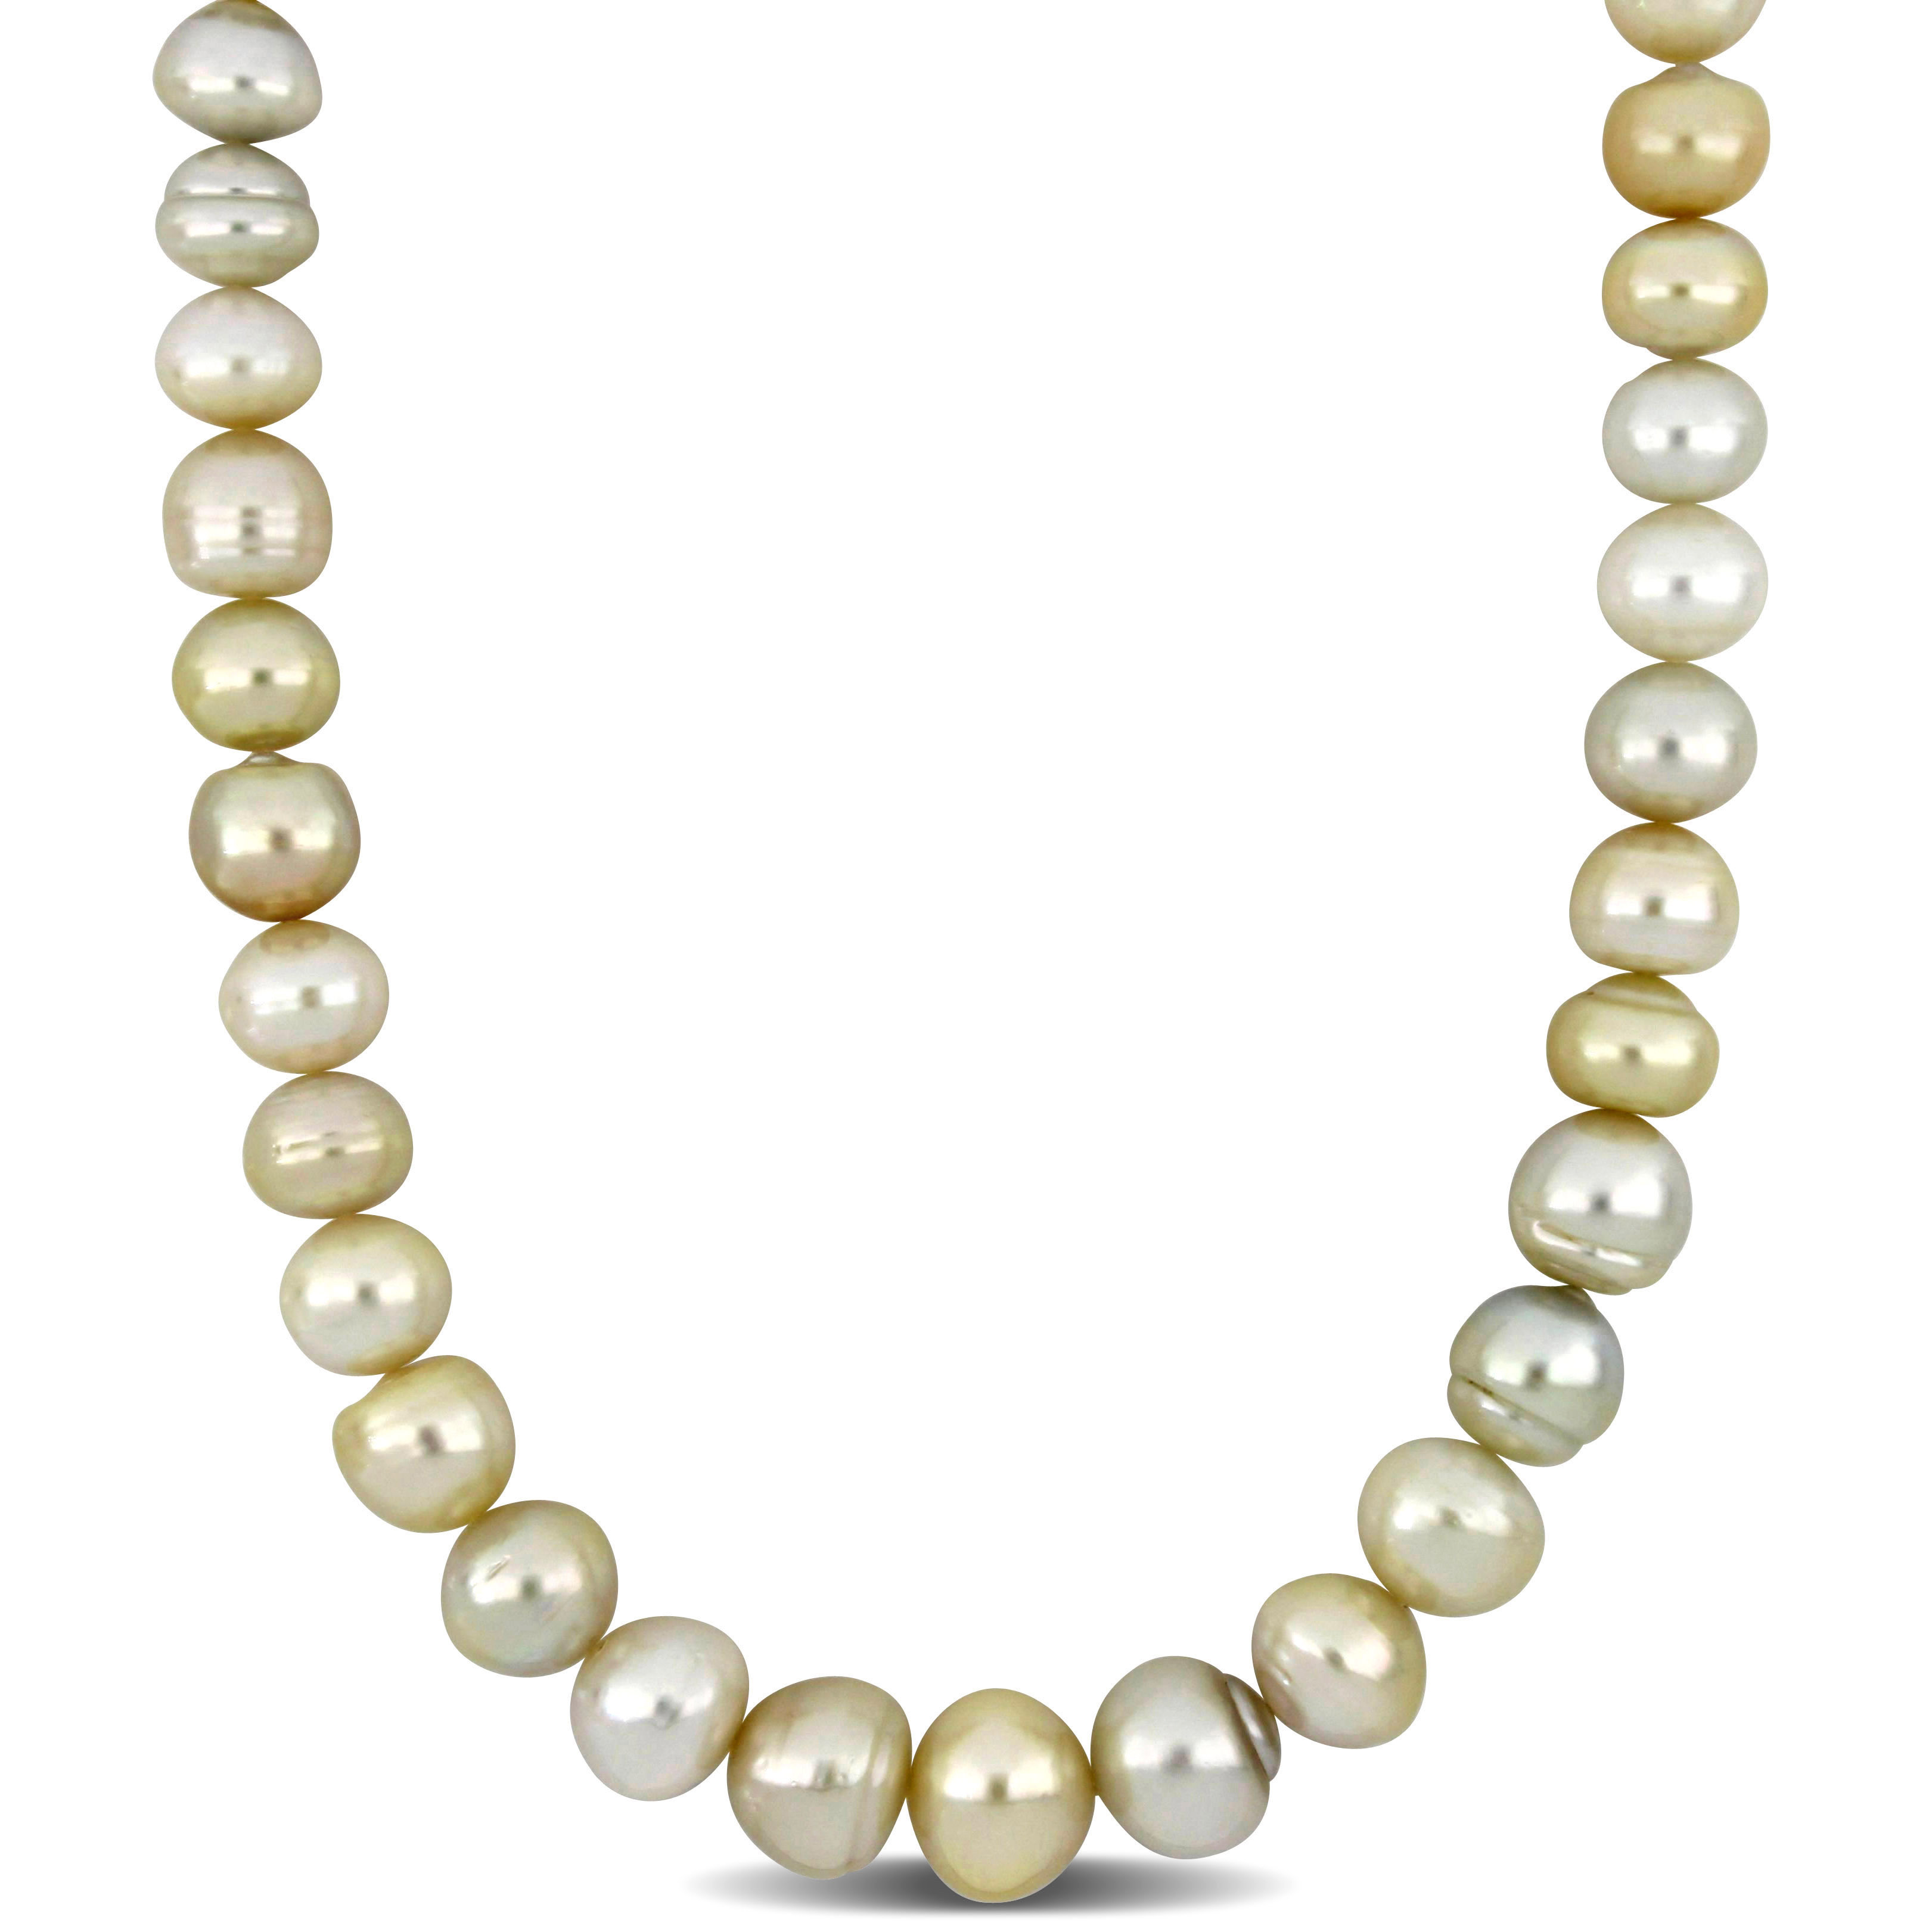 12-15 MM Off-Round Golden South Sea Cultured Multi-Colored Pearl Necklace in 14k Yellow Gold - 18 in